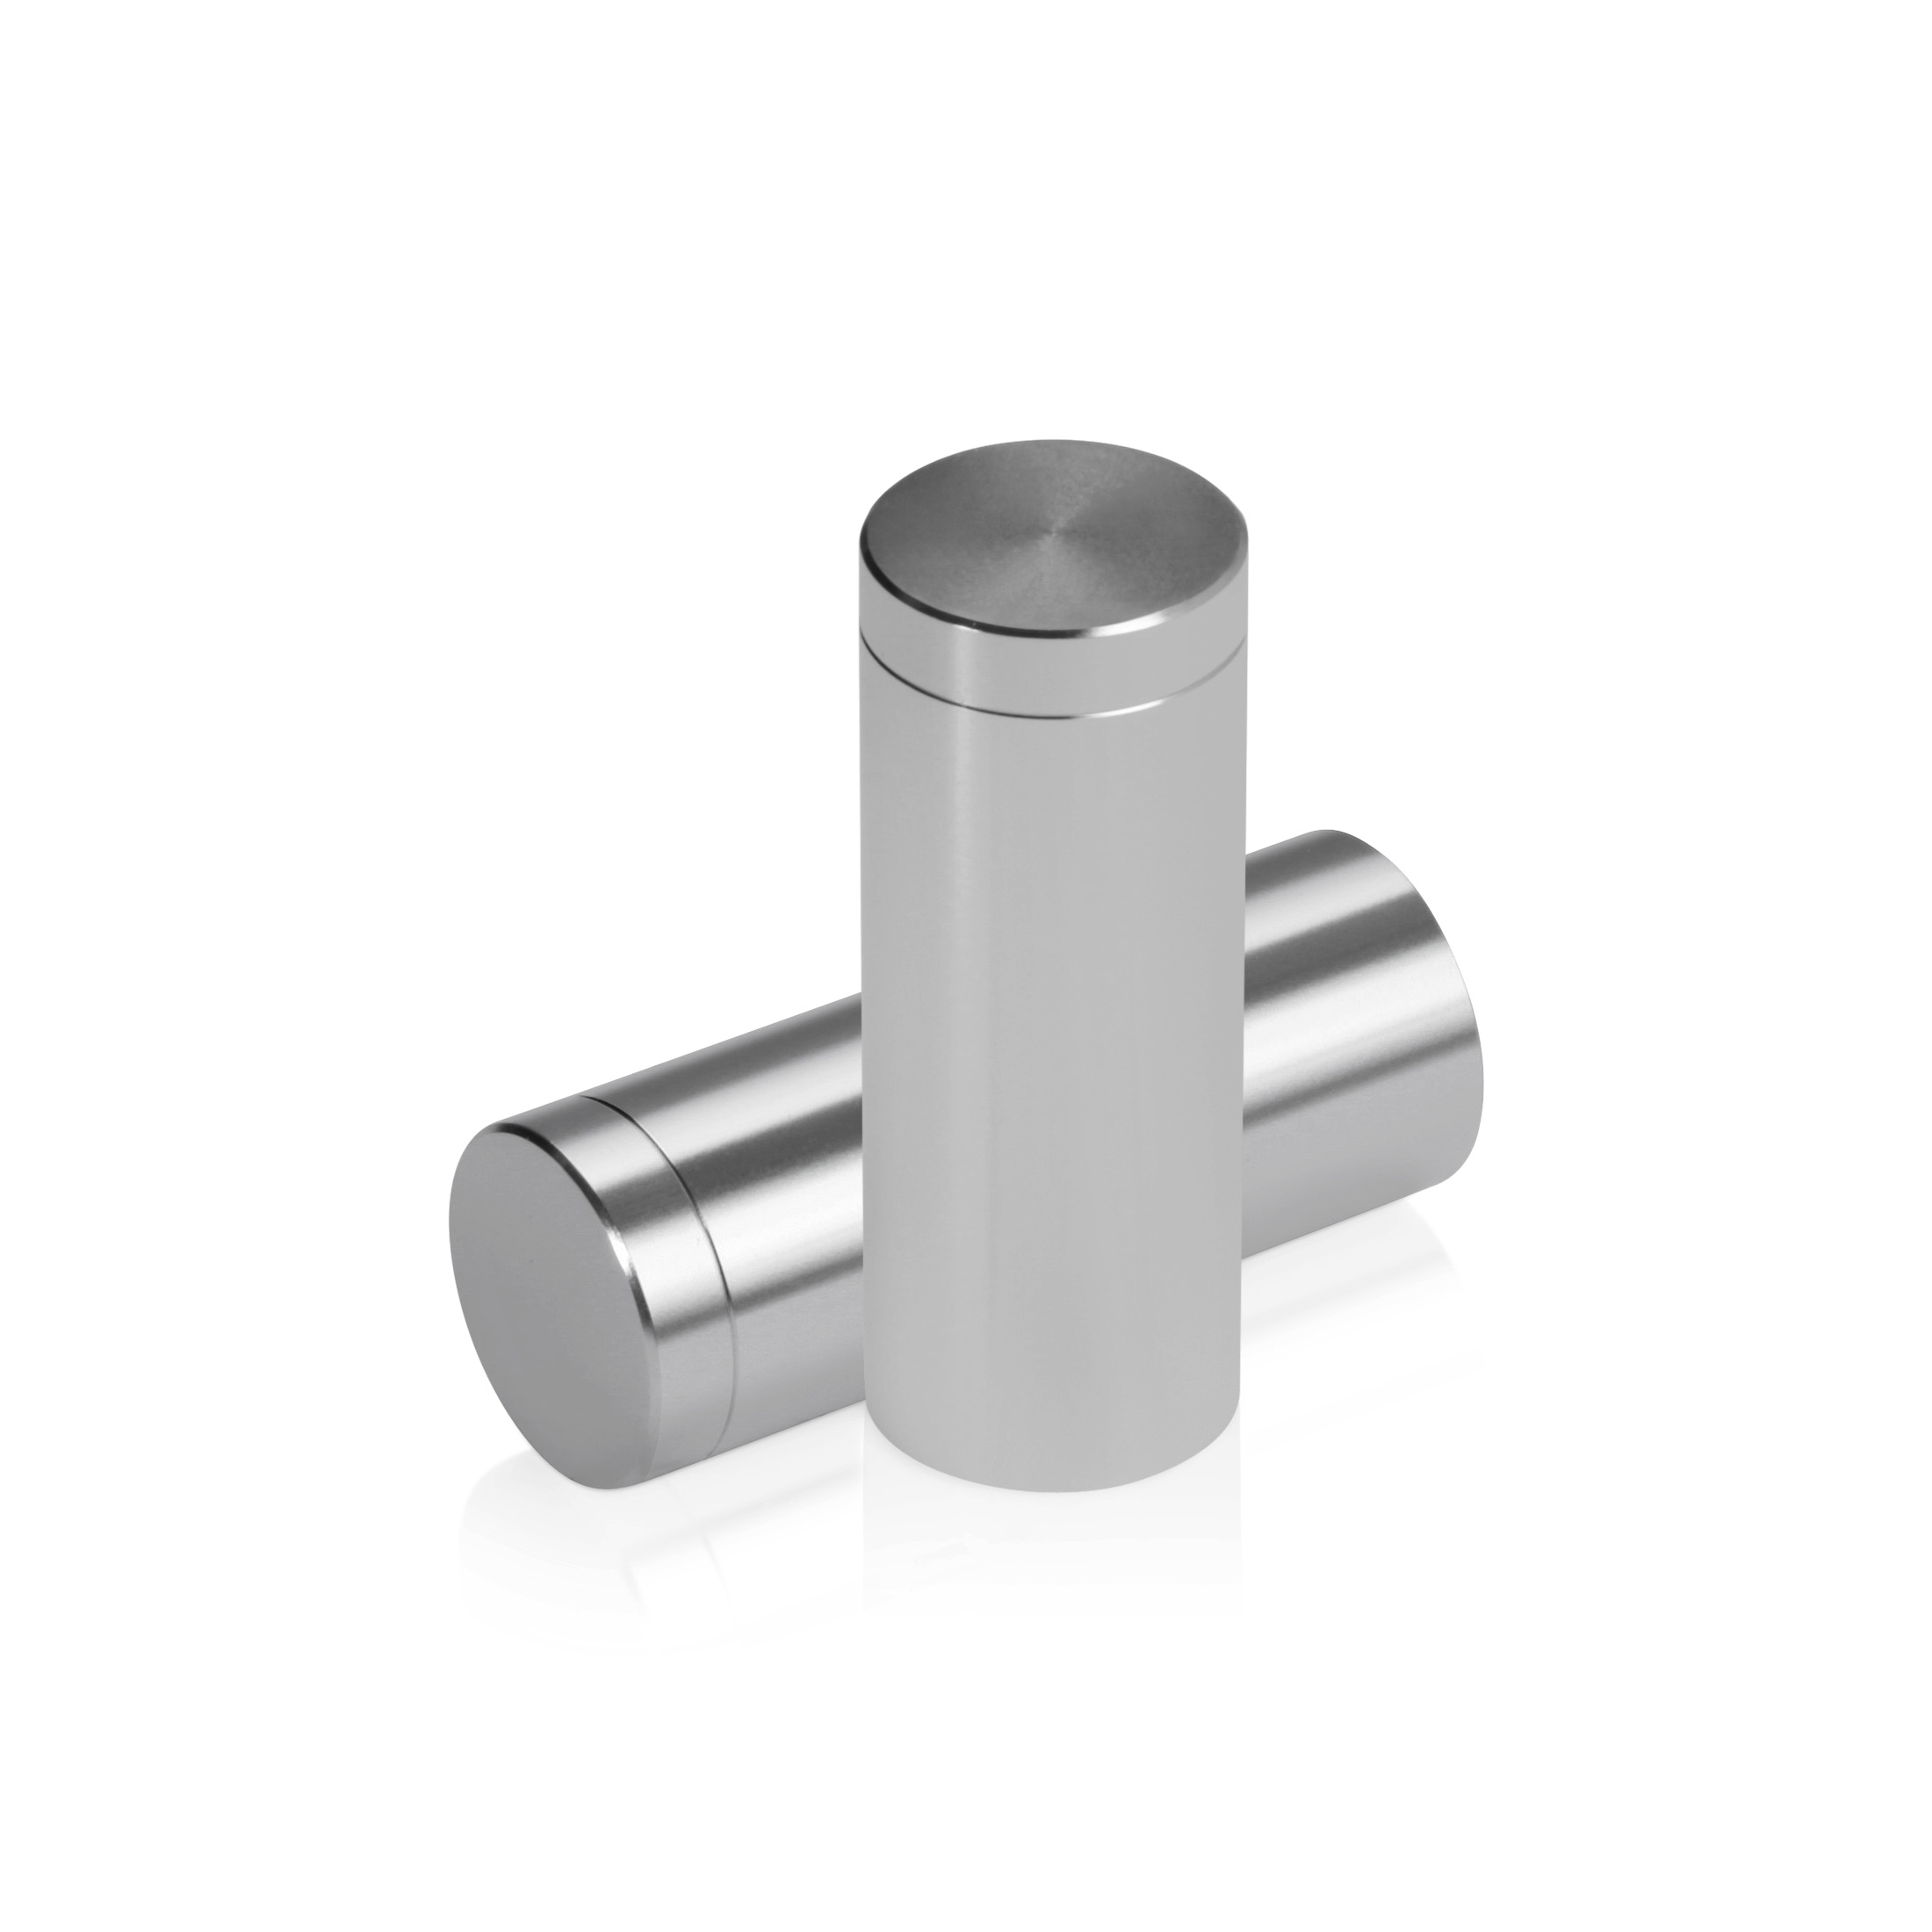 5/8'' Diameter X 1-1/2'' Barrel Length, Affordable Aluminum Standoffs, Steel Grey Anodized Finish Easy Fasten Standoff (For Inside / Outside use) [Required Material Hole Size: 7/16'']